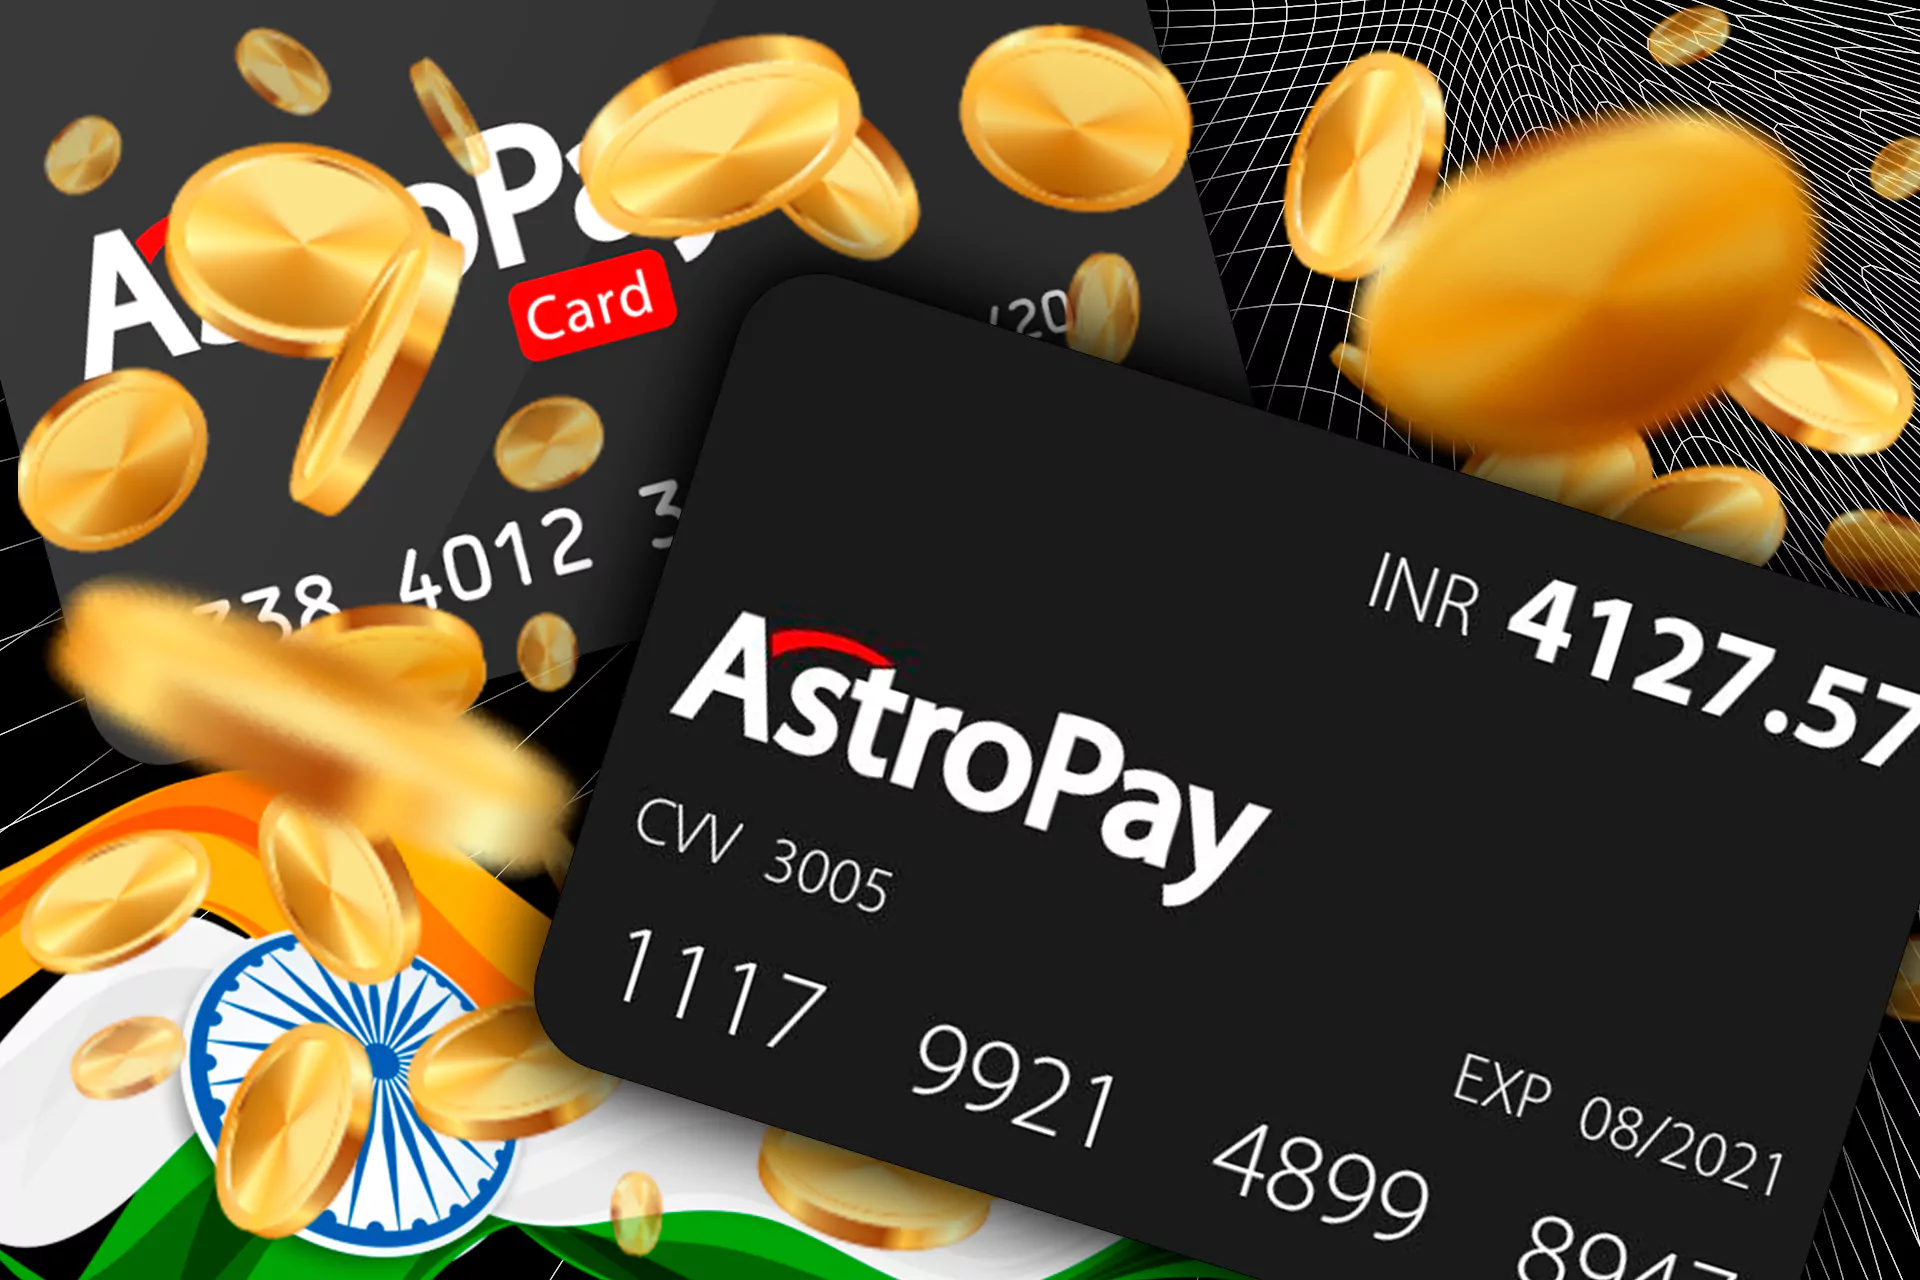 You can sign up at Astropay and order the card.